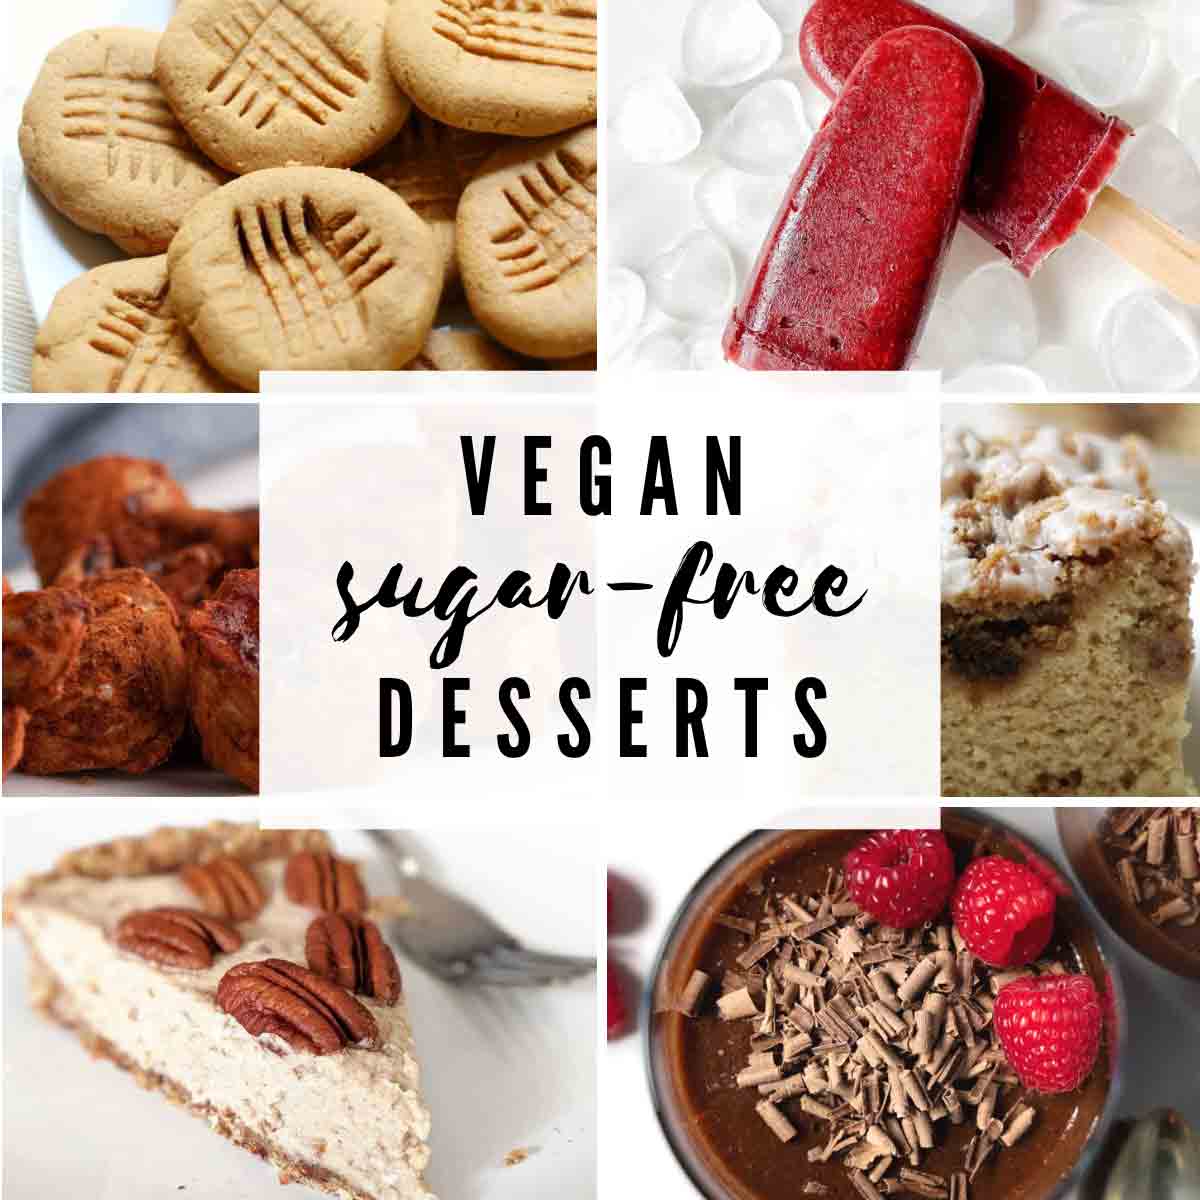 Vegan Sugar Free Desserts Image Collage With Text Overlay